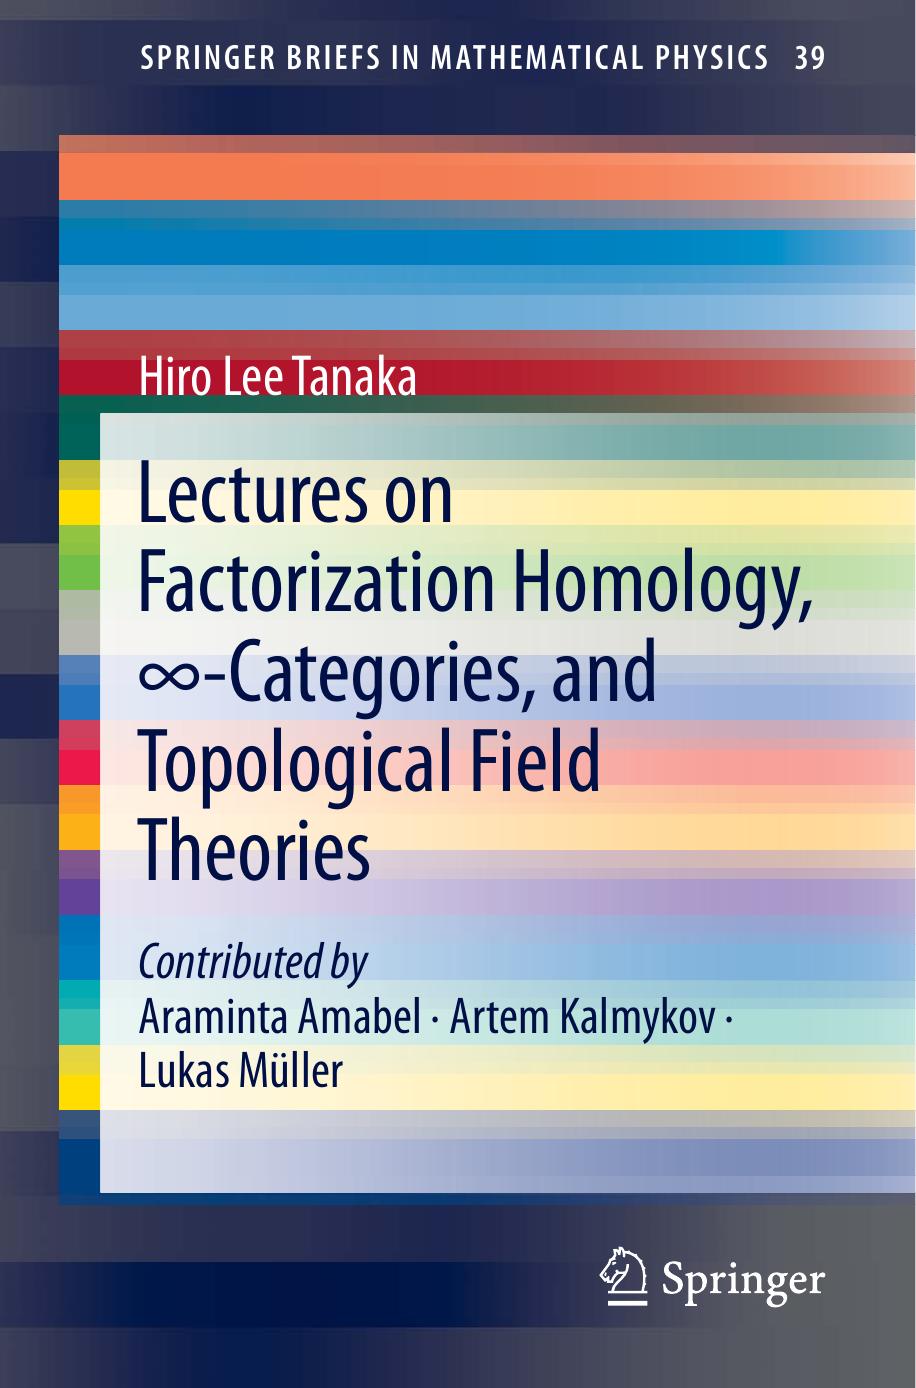 Lectures on Factorization Homology, â-Categories, and Topological Field Theories by Hiro Lee Tanaka